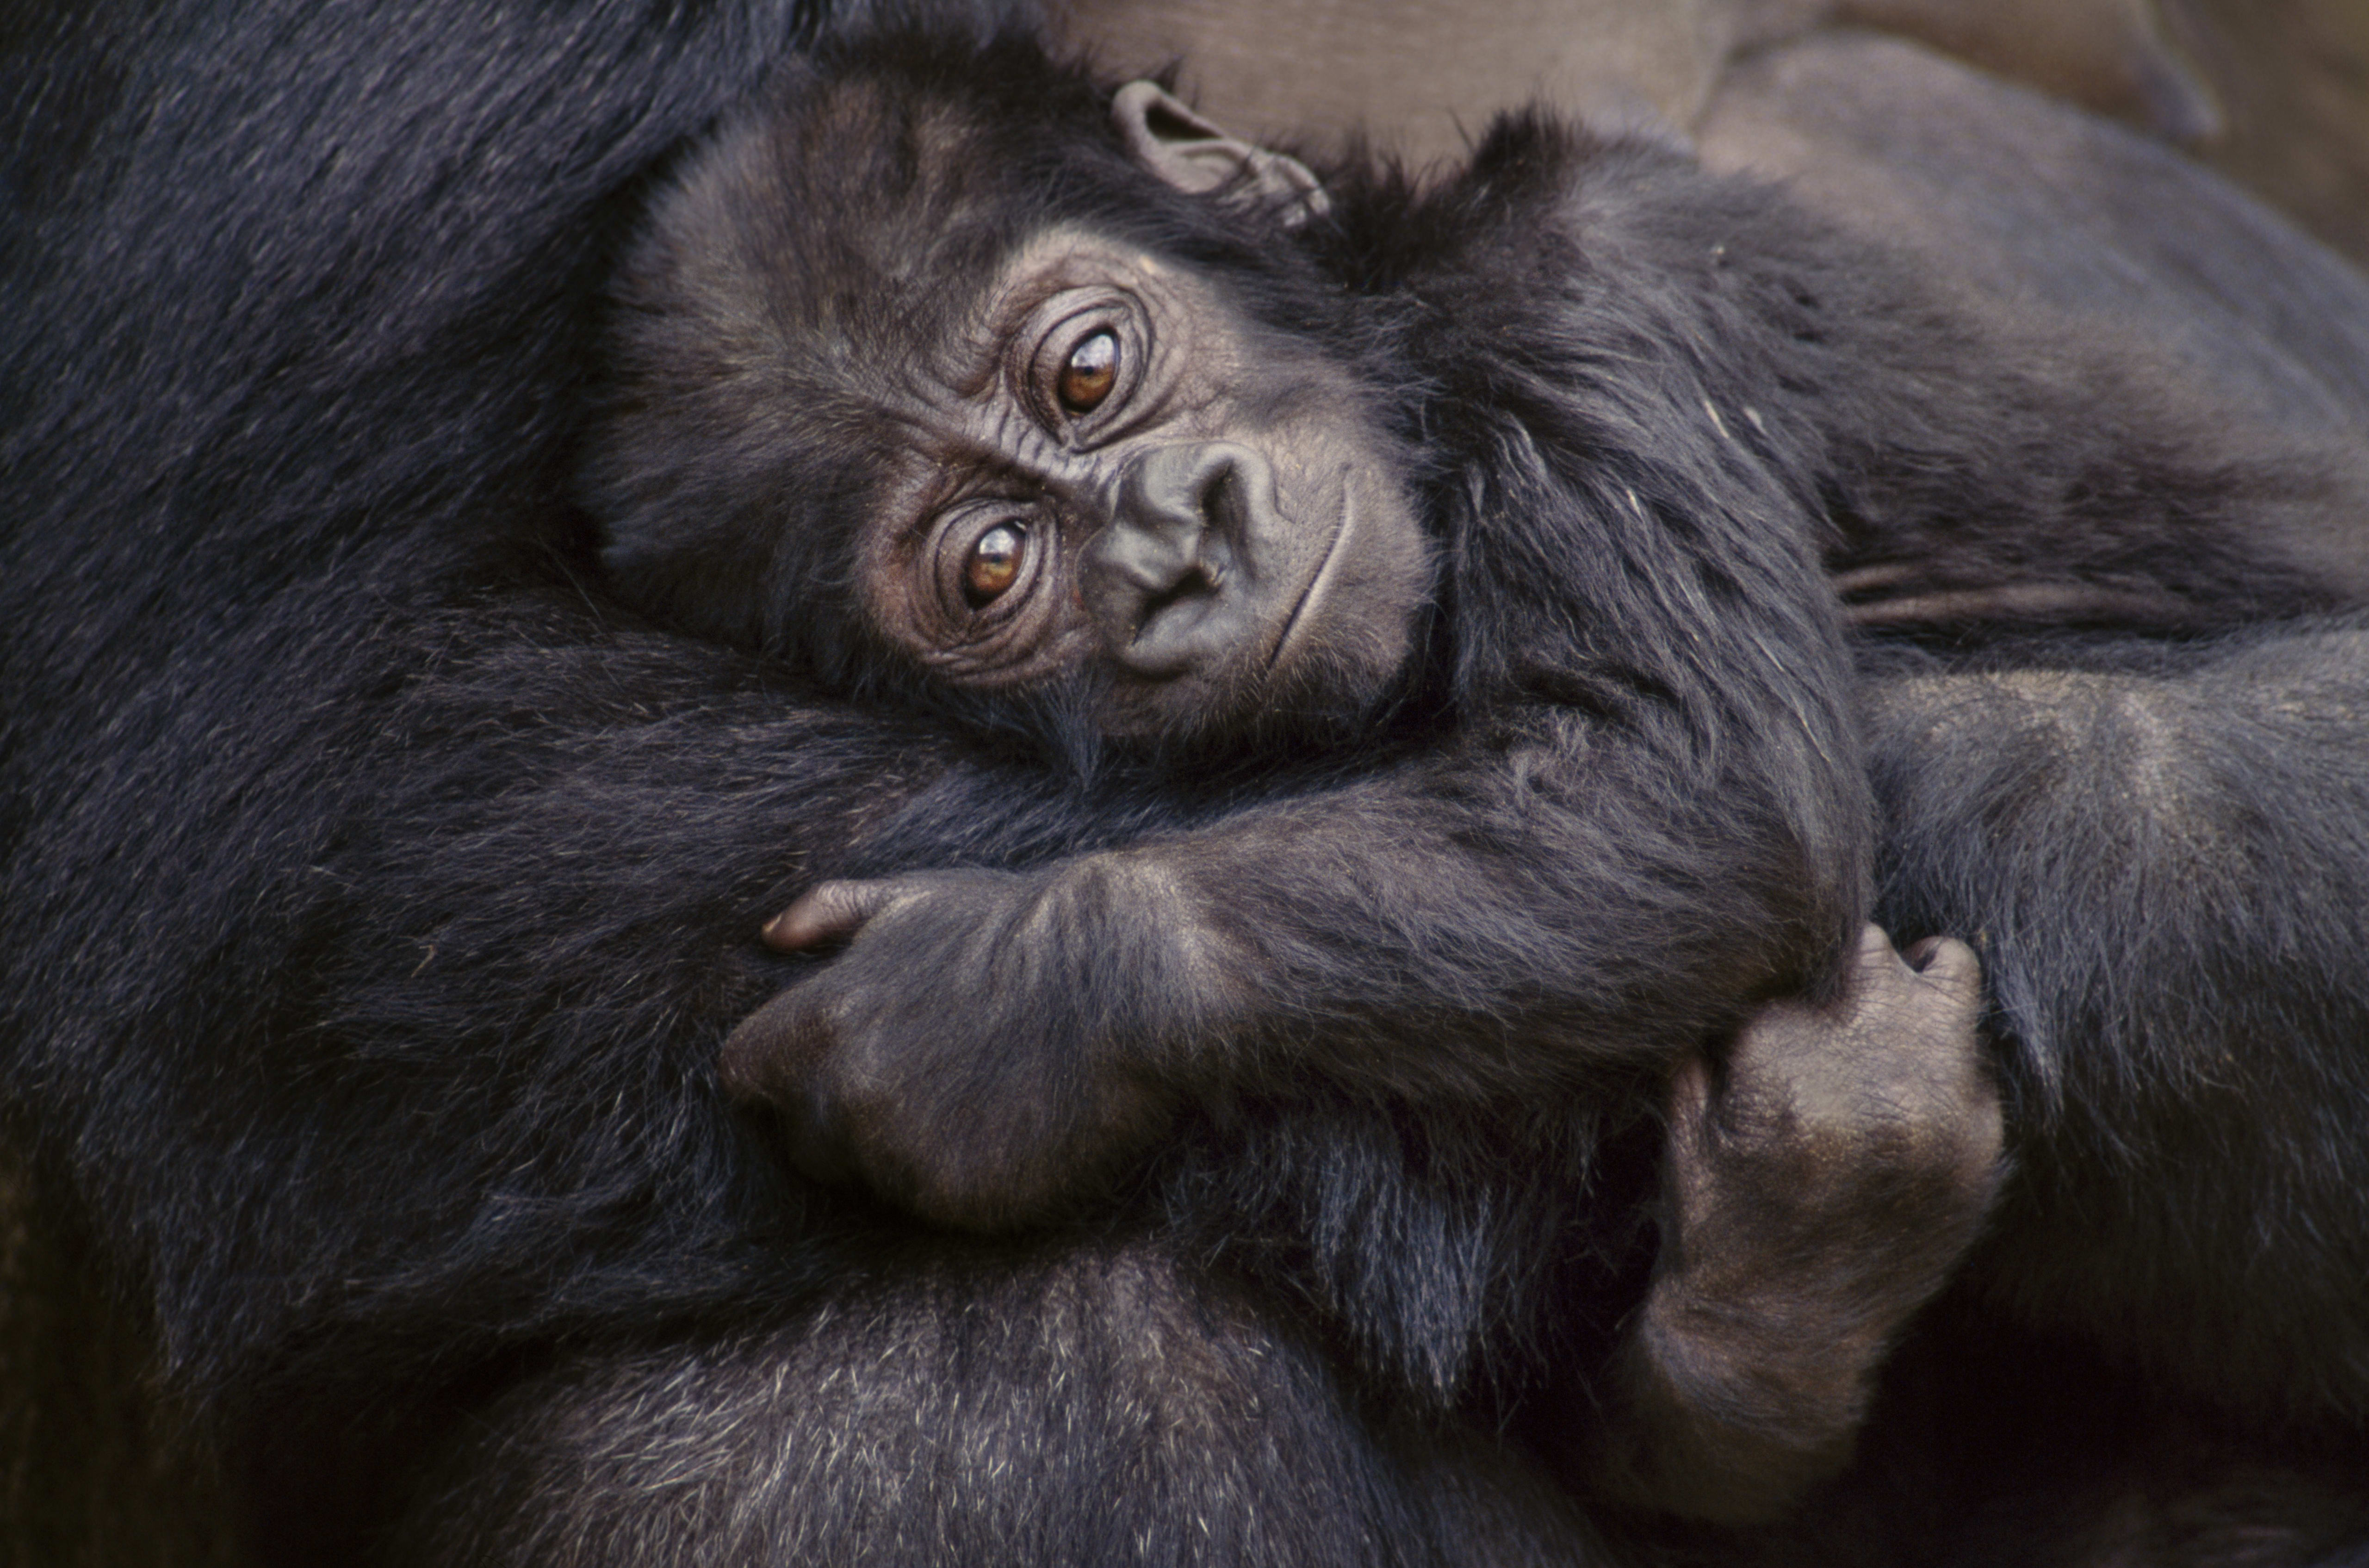 A baby Eastern lowland gorilla in its parent's arms, Kahuzi Biega National Park, Democratic Republic of Congo.